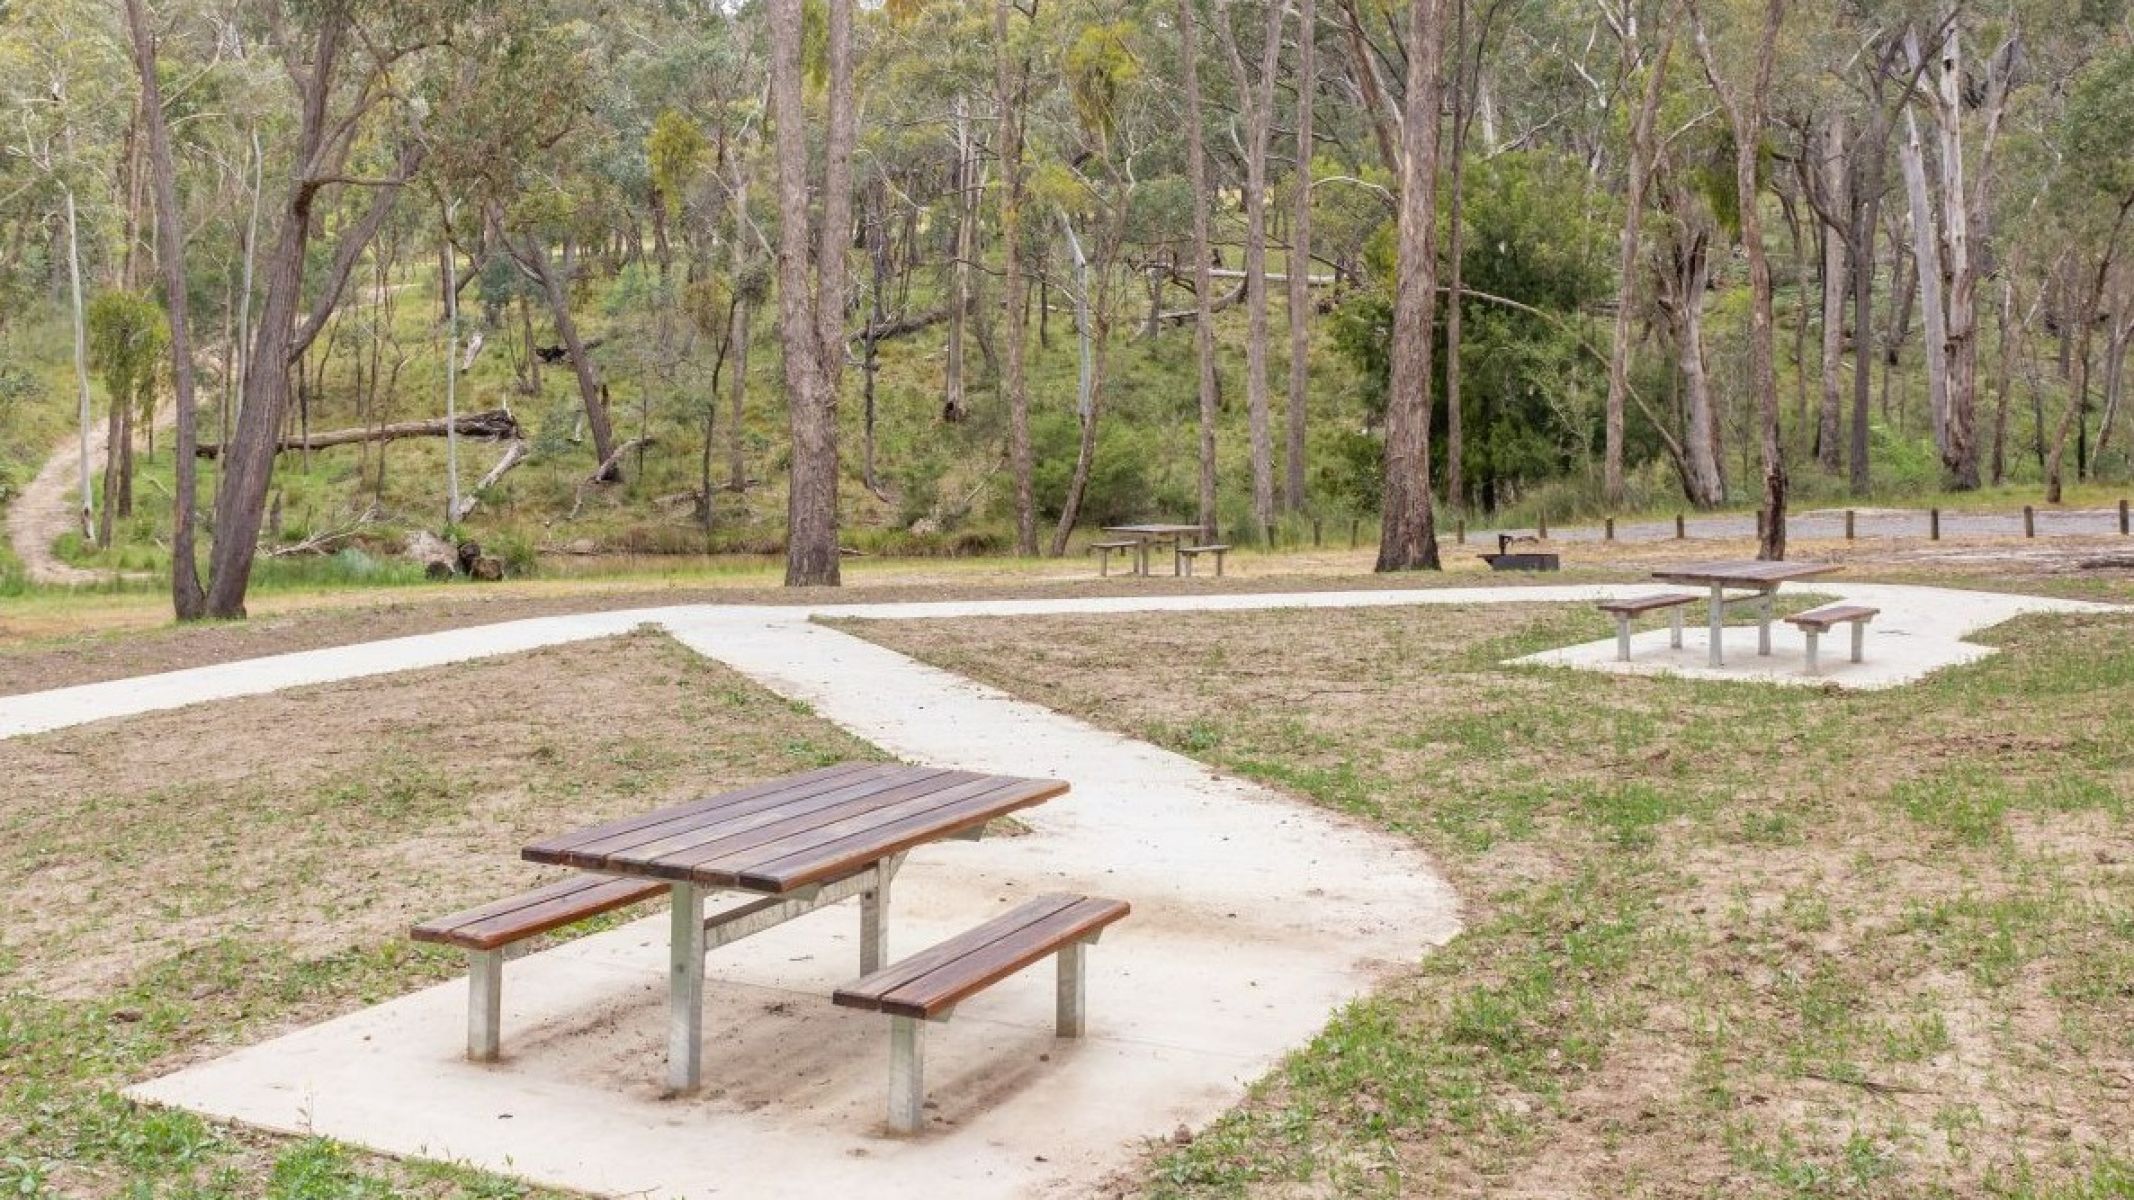 Pathways lead up to two wooden picnic tables in a grassy area. The area is surrounded by tall gum trees